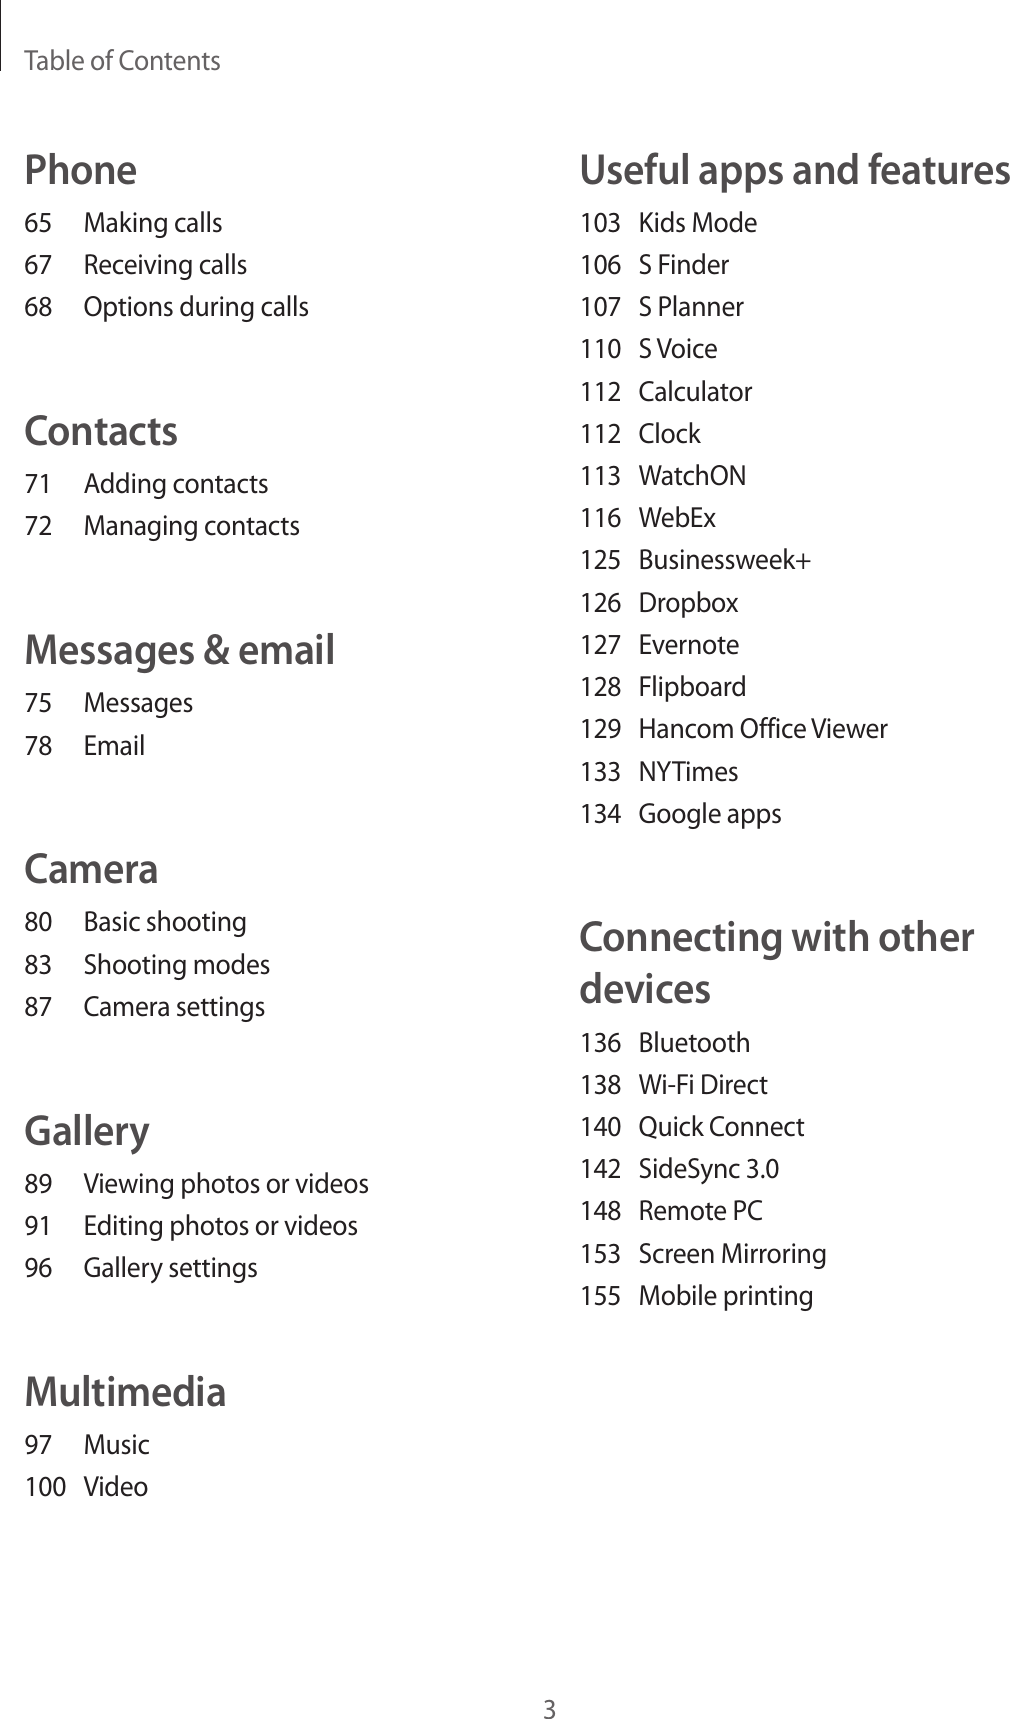 Table of Contents3Useful apps and features103  Kids Mode106  S Finder107  S Planner110  S Voice112 Calculator112 Clock113 WatchON116 WebEx125 Businessweek+126 Dropbox127 Evernote128 Flipboard129  Hancom Office Viewer133 NYTimes134  Google appsConnecting with other devices136 Bluetooth138  Wi-Fi Direct140  Quick Connect142  SideSync 3.0148  Remote PC153  Screen Mirroring155  Mobile printingPhone65  Making calls67  Receiving calls68  Options during callsContacts71  Adding contacts72  Managing contactsMessages &amp; email75 Messages78 EmailCamera80  Basic shooting83  Shooting modes87  Camera settingsGallery89  Viewing photos or videos91  Editing photos or videos96  Gallery settingsMultimedia97 Music100 Video